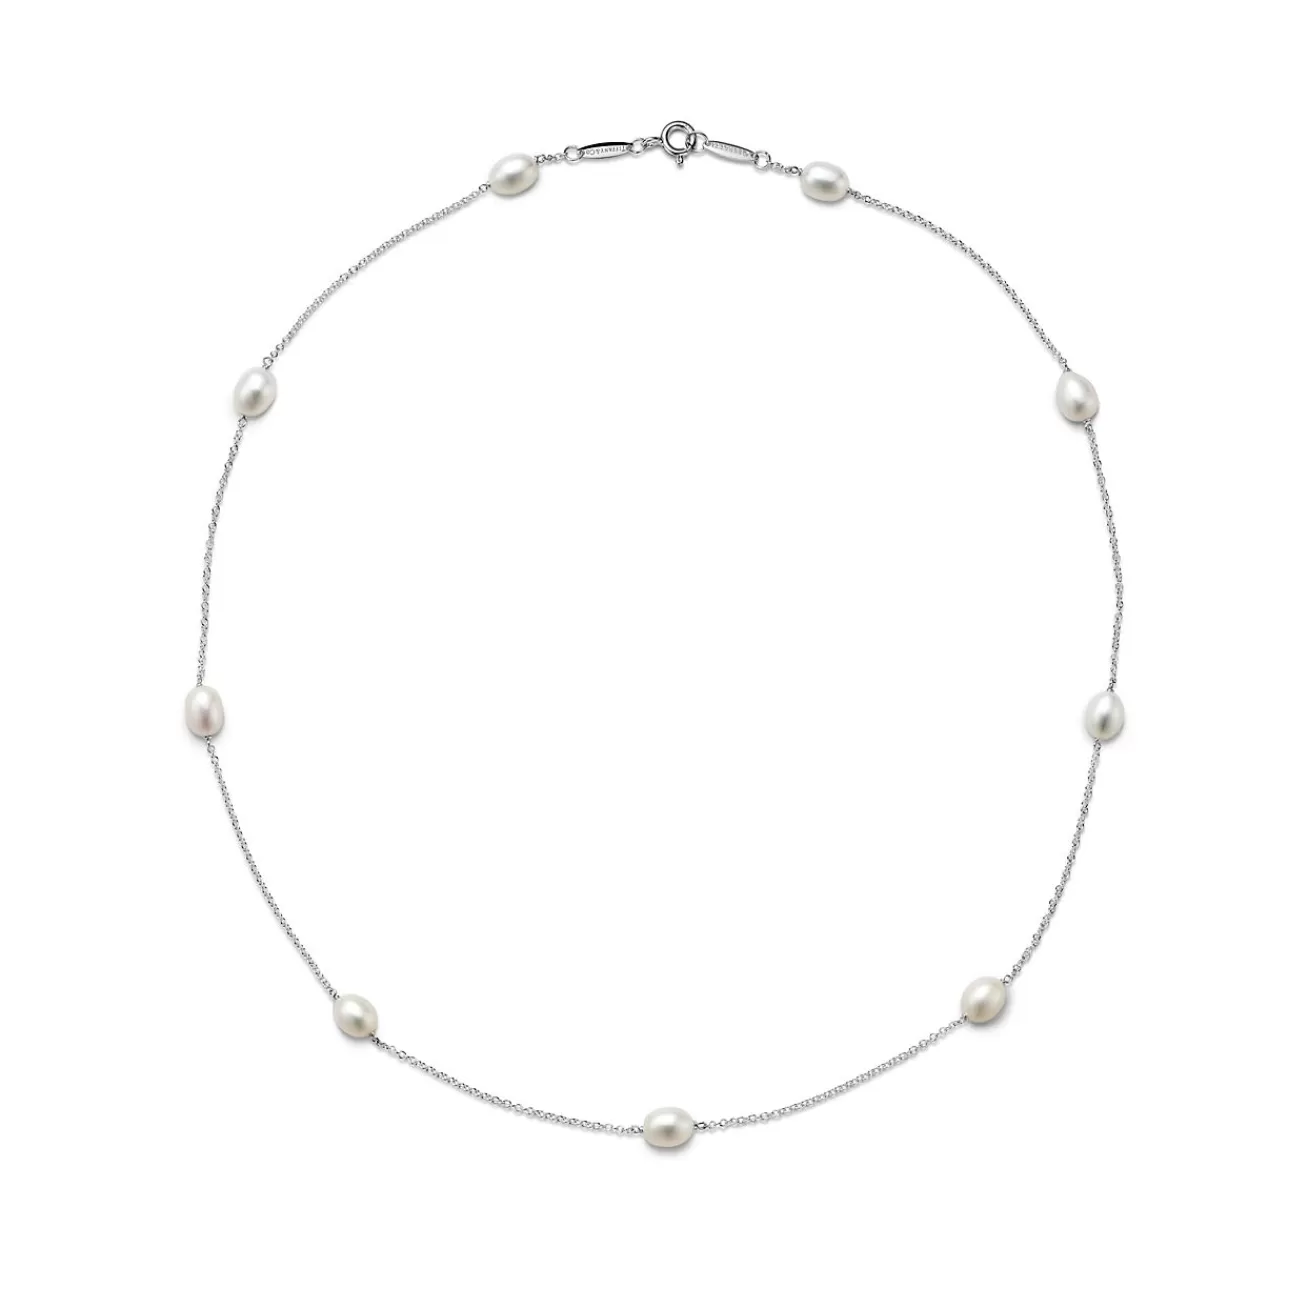 Tiffany & Co. Elsa Peretti® Pearls by the Yard™ necklace in sterling silver. | ^ Necklaces & Pendants | Sterling Silver Jewelry